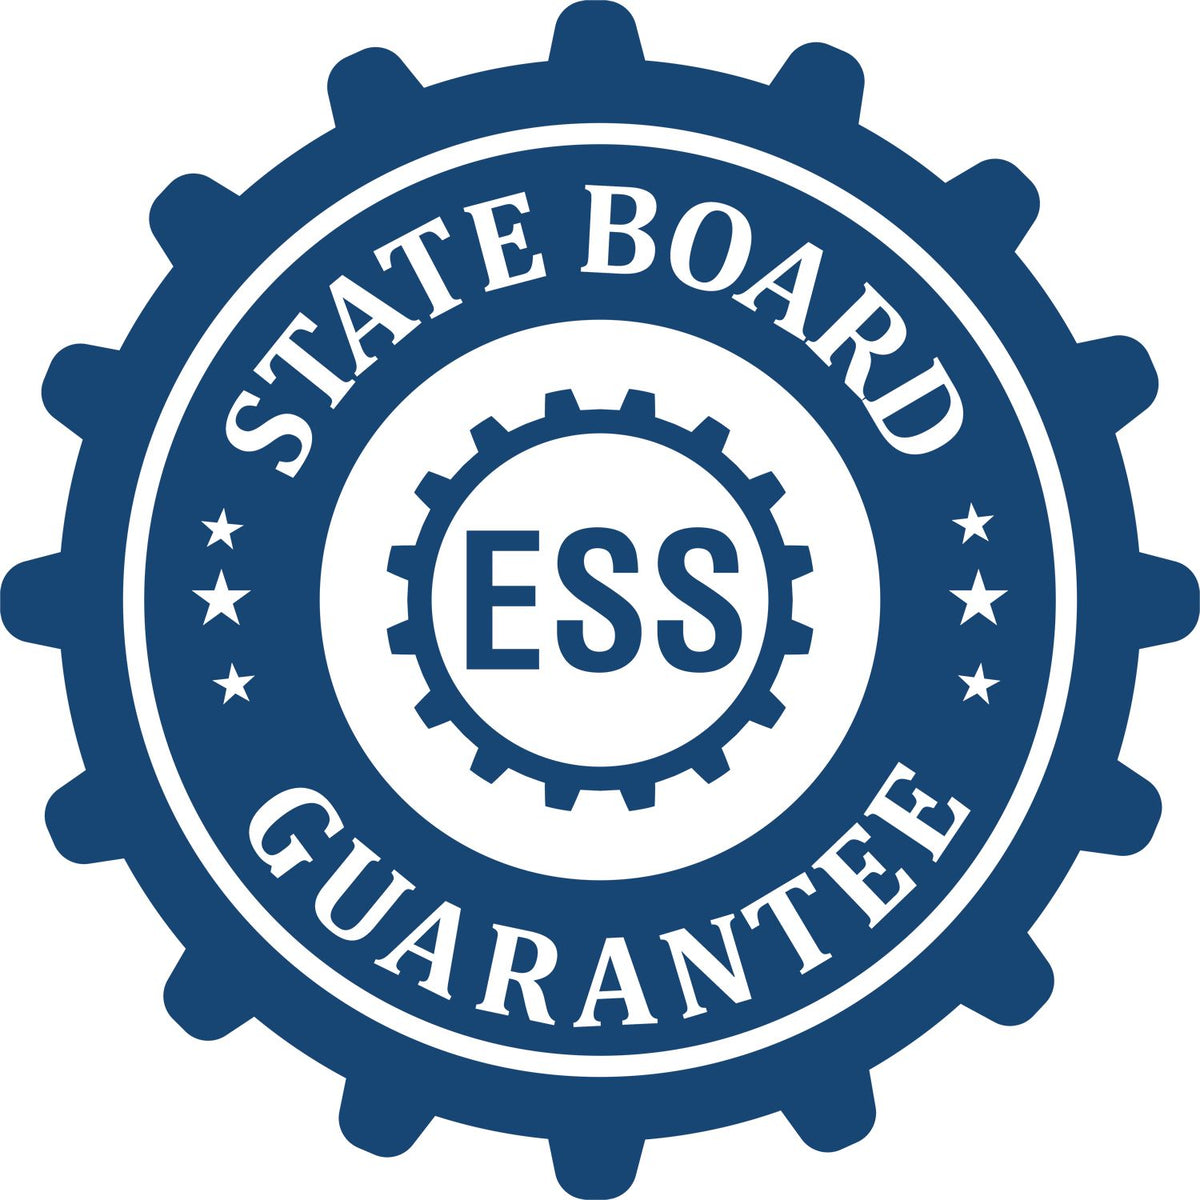 An emblem in a gear shape illustrating a state board guarantee for the Soft Delaware Professional Engineer Seal product.